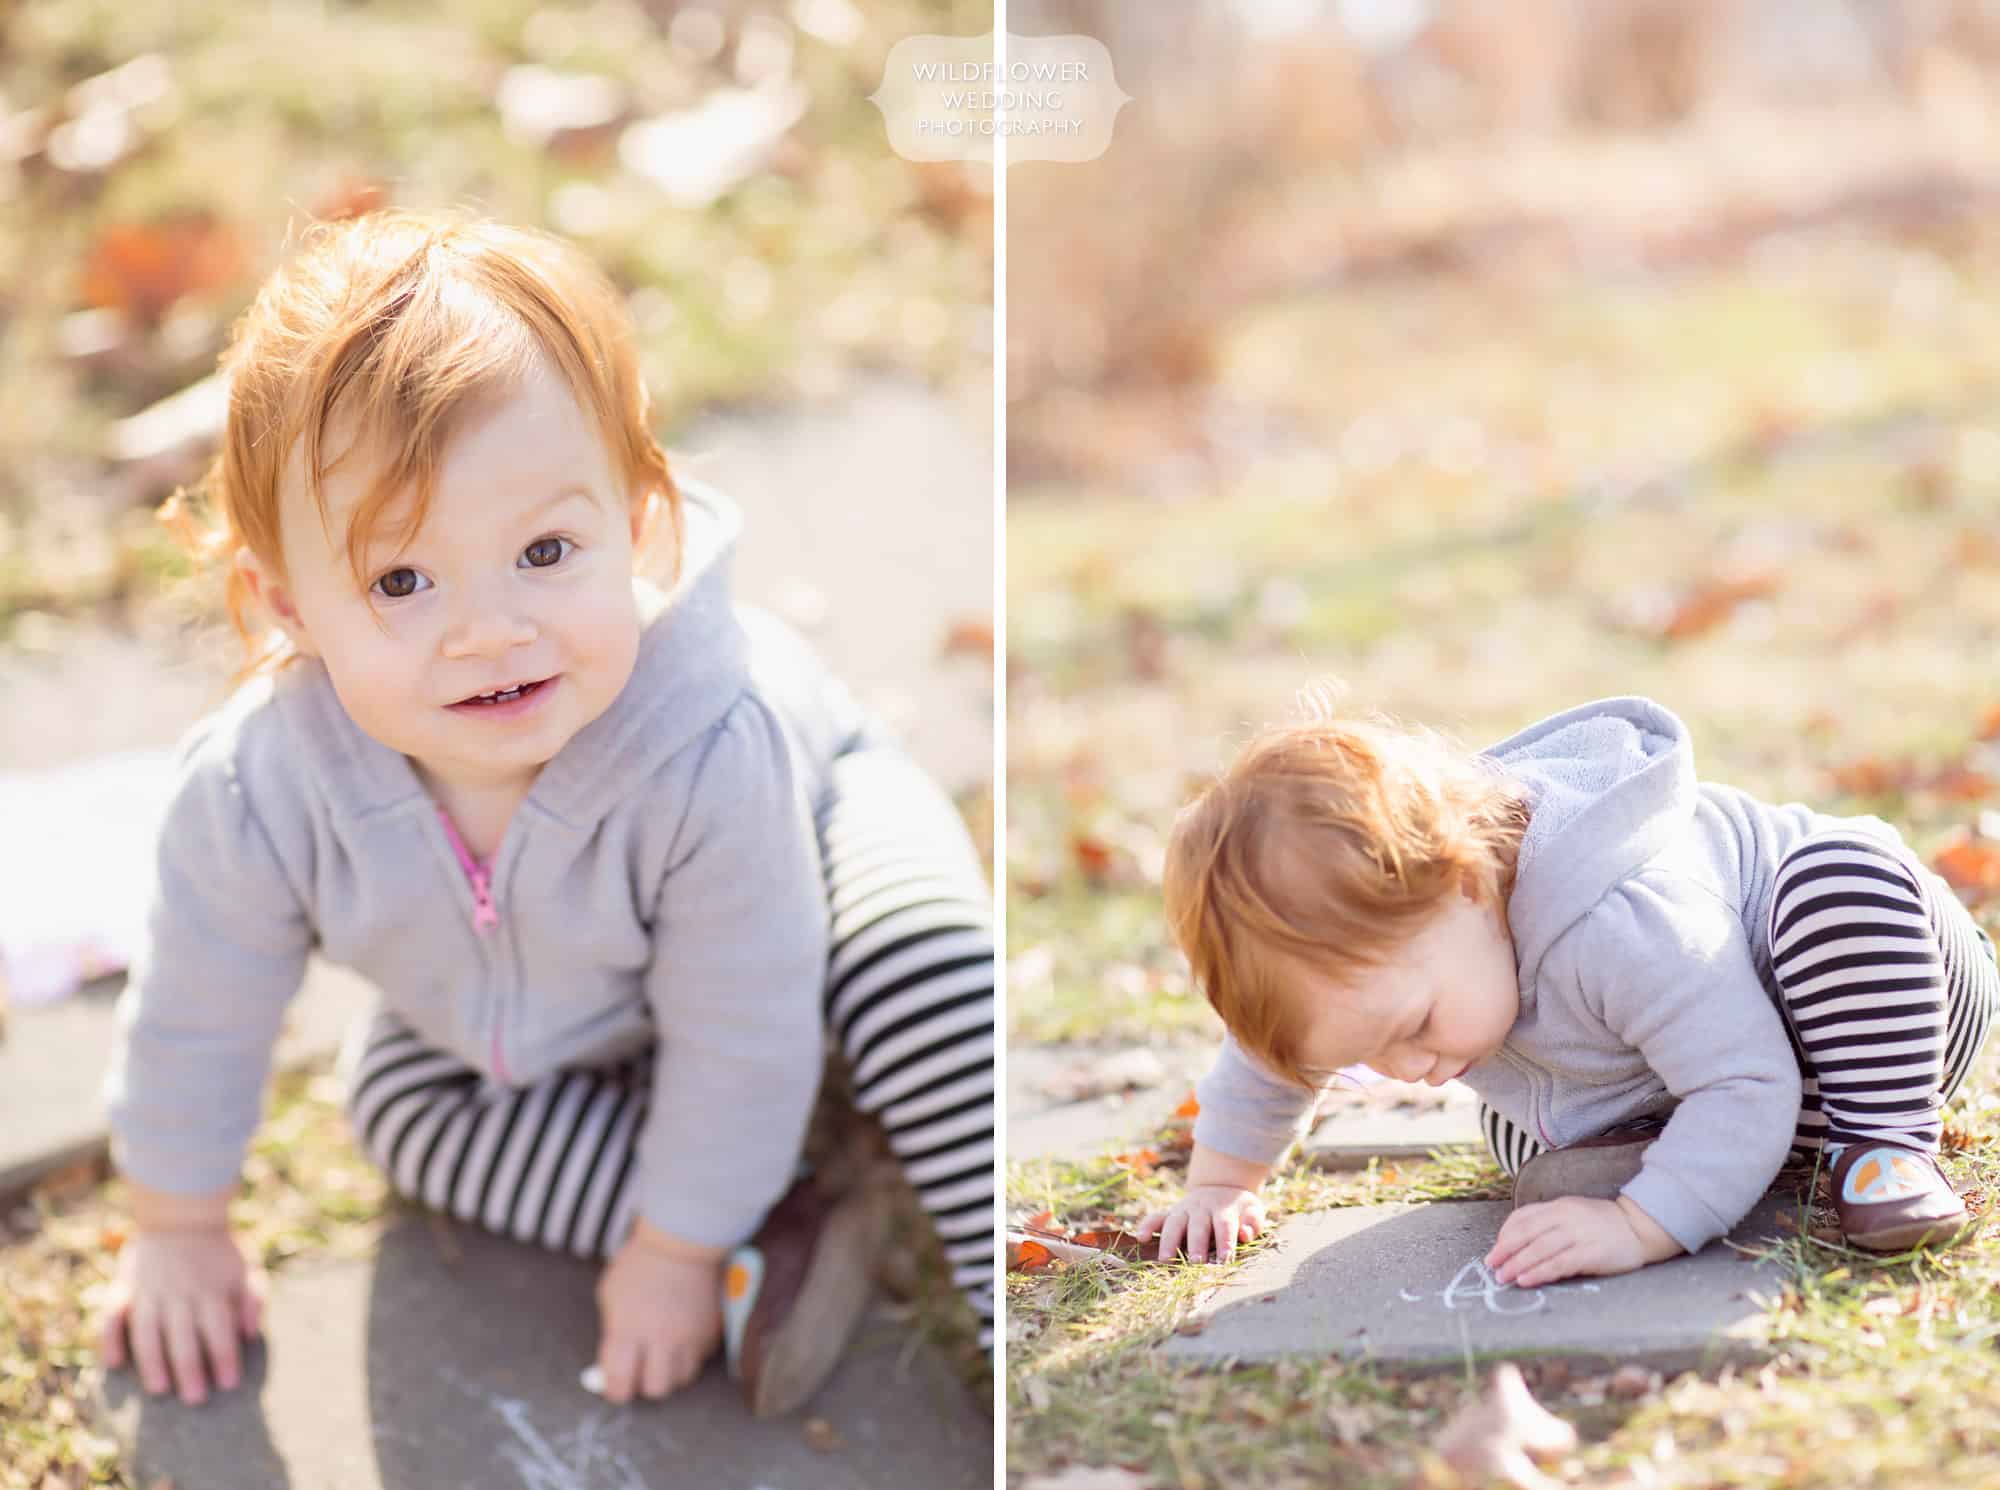 Toddler plays in the sunshine during this outdoor relaxed photography shoot.